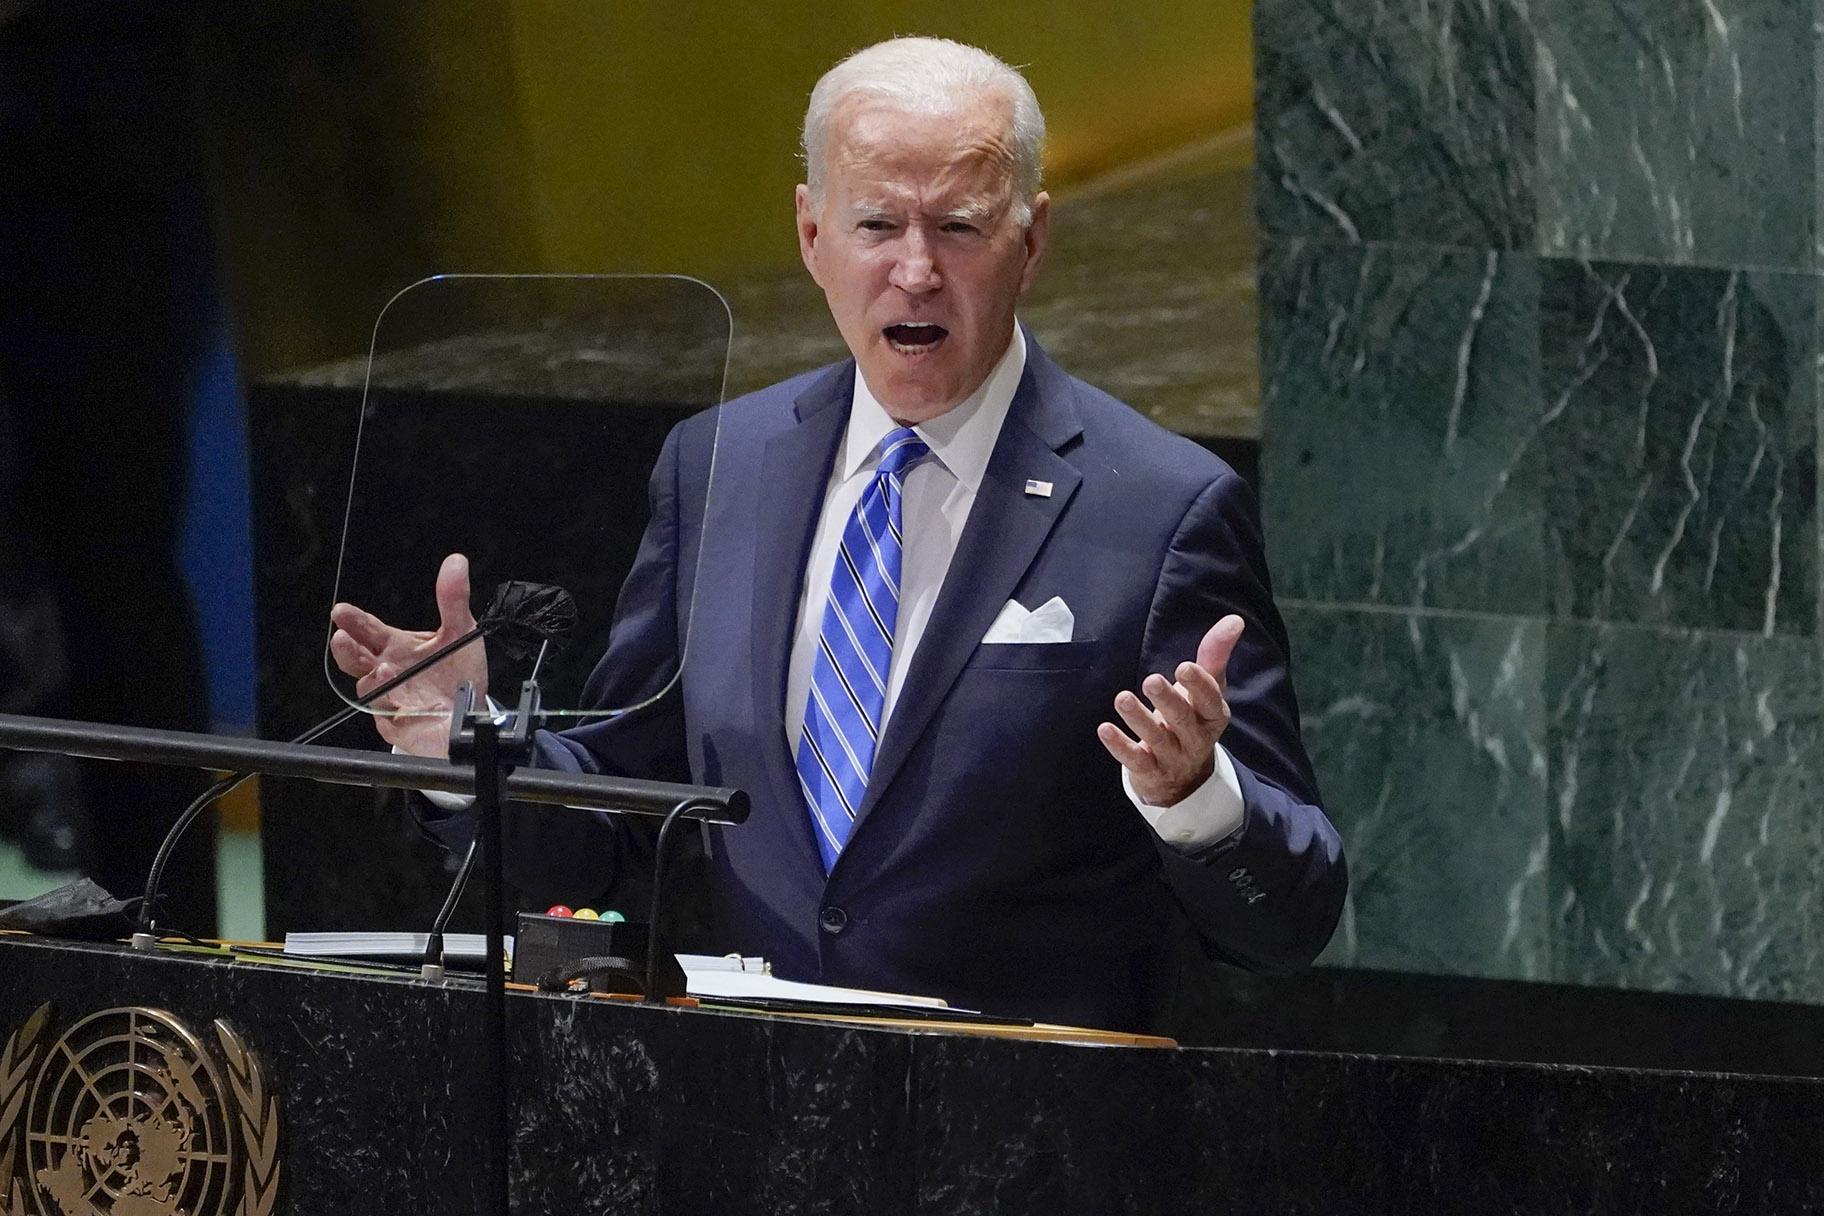 President Joe Biden delivers remarks to the 76th Session of the United Nations General Assembly, Tuesday, Sept. 21, 2021, in New York. (AP Photo / Evan Vucci)